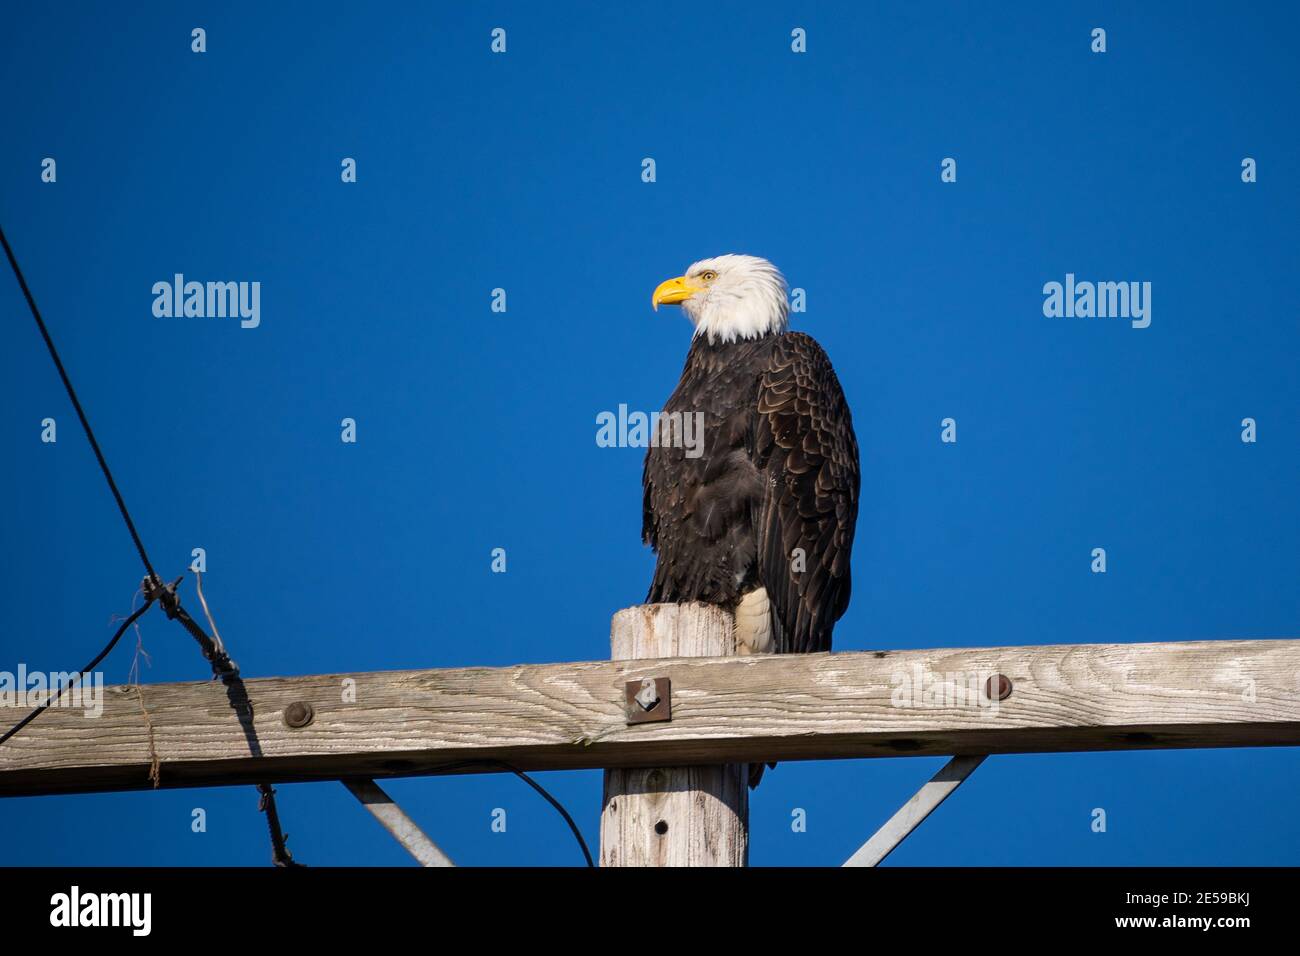 Bald eagle (Haliaeetus leucocephalus) is a bird of prey found in North America. It is found near large bodies of open water with an abundant food supp Stock Photo